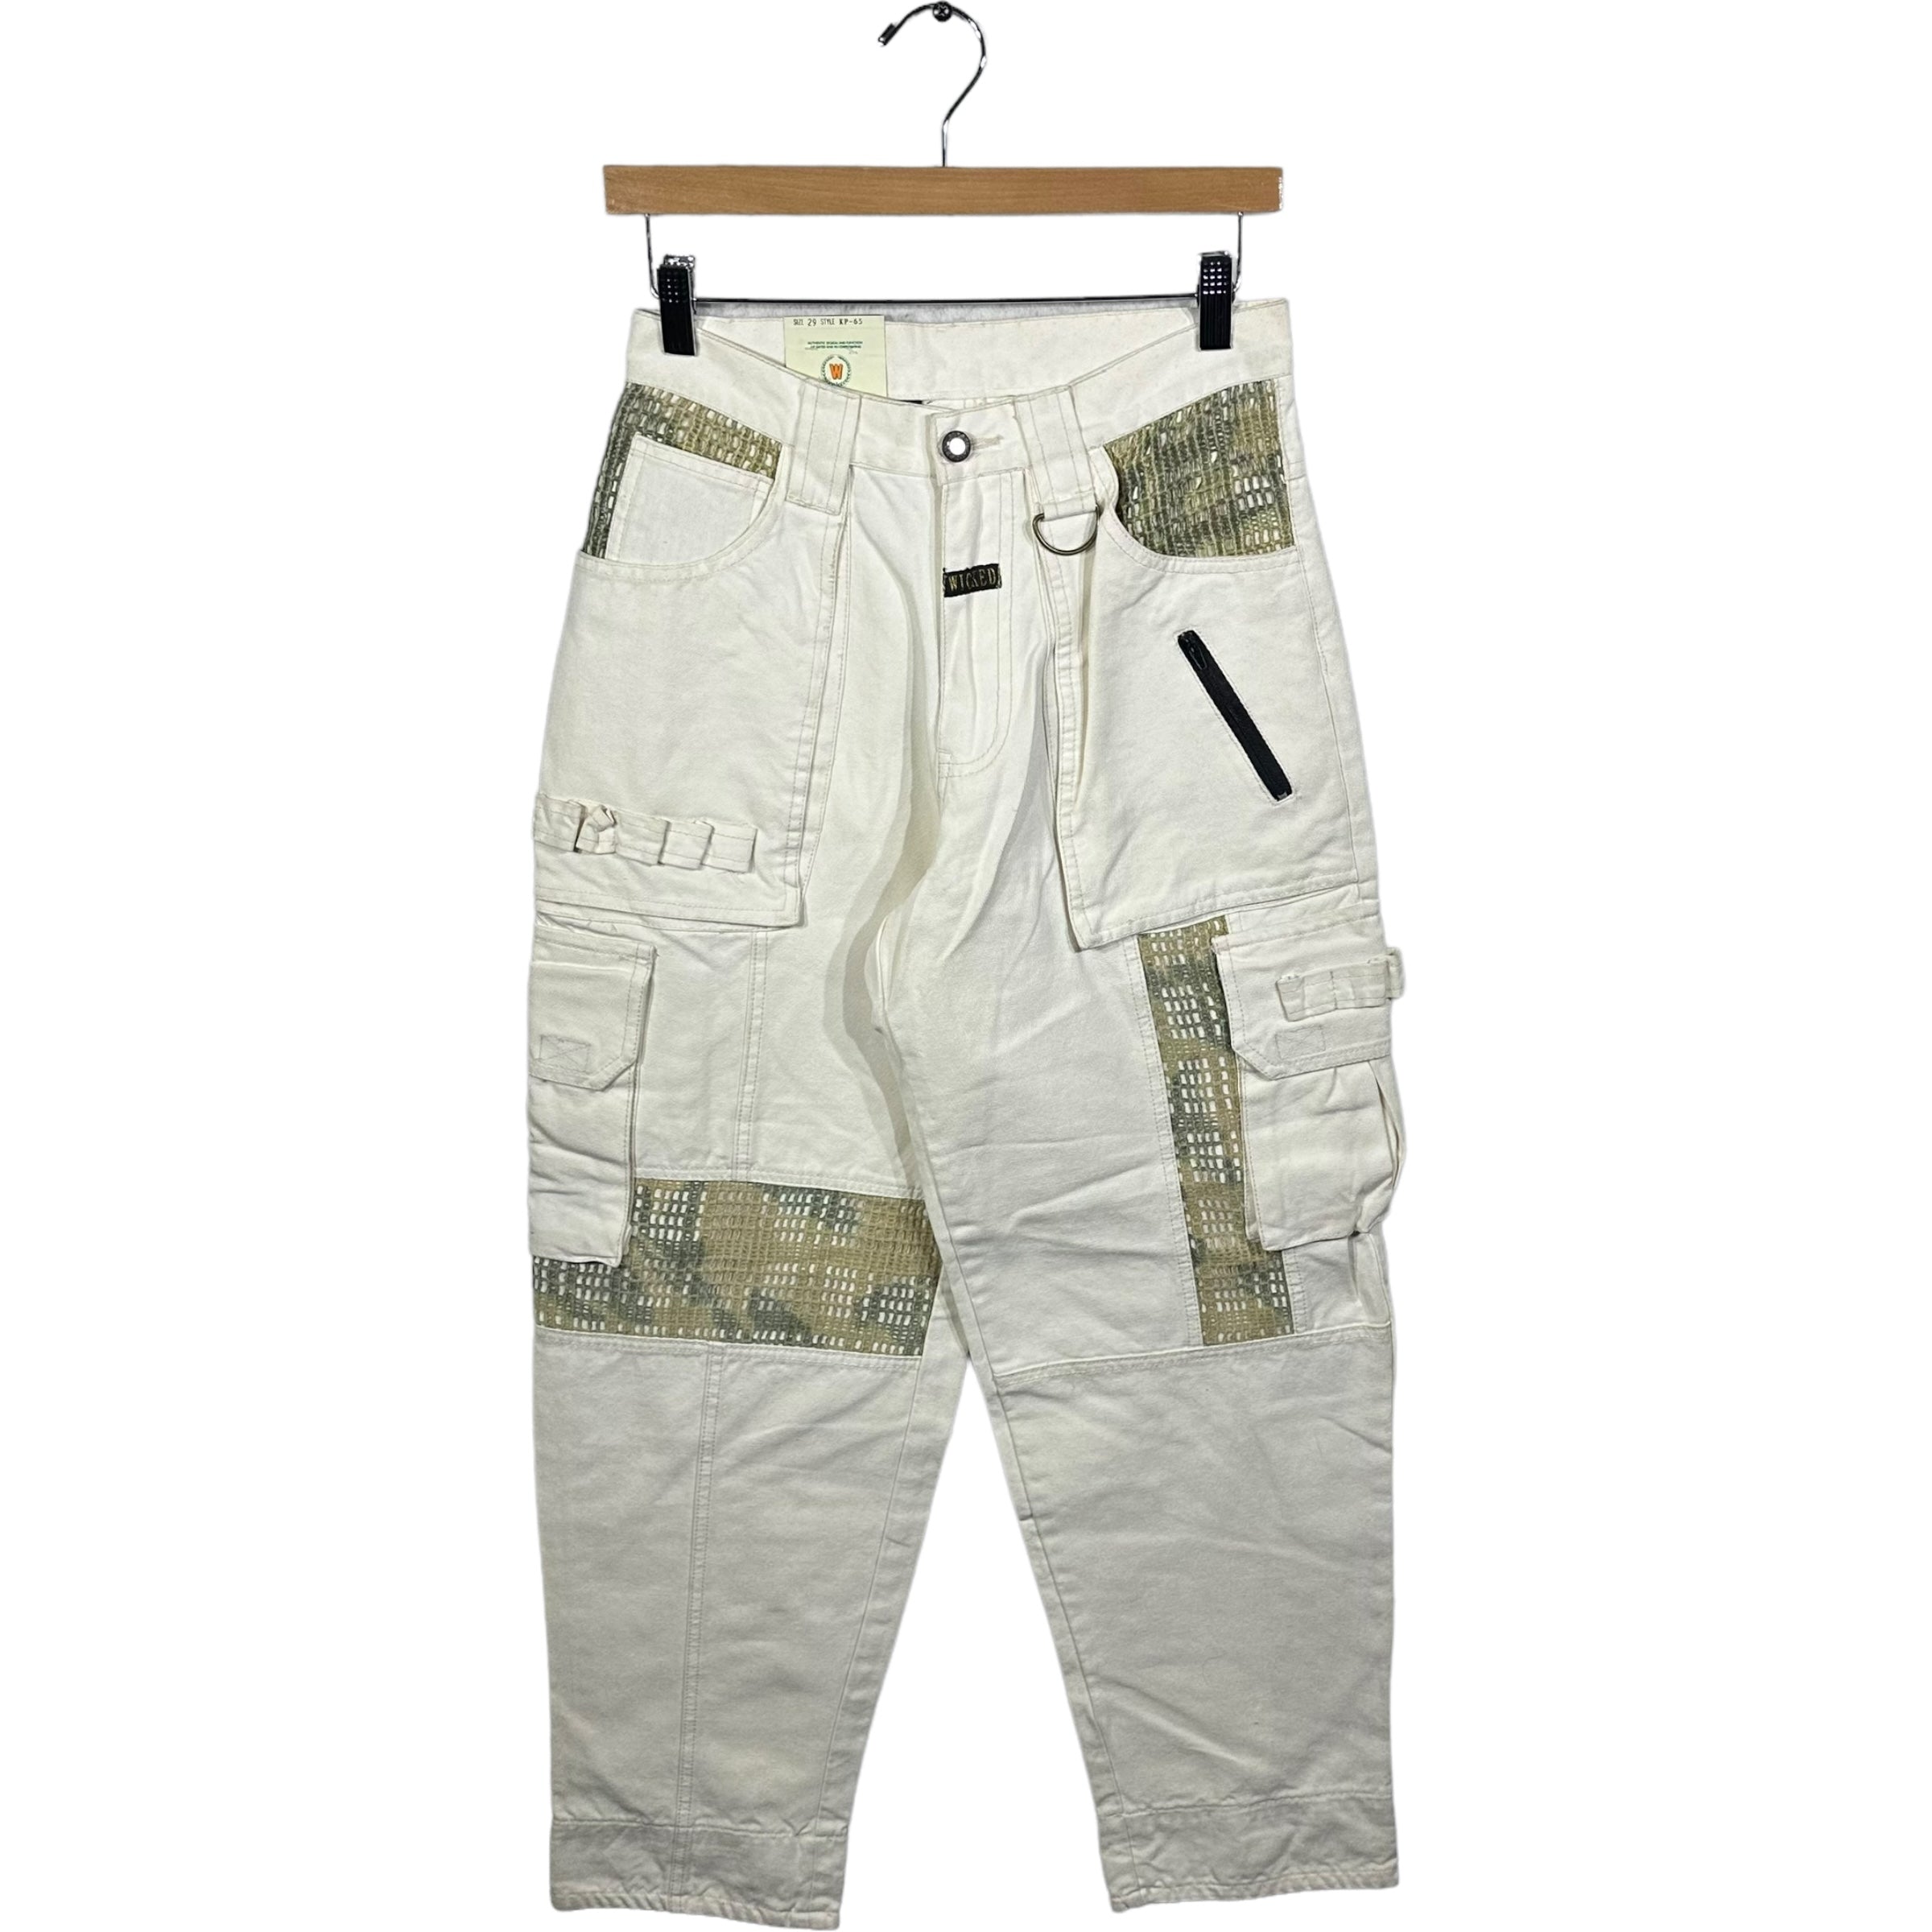 Wicked Y2K Cargo Pants NWT